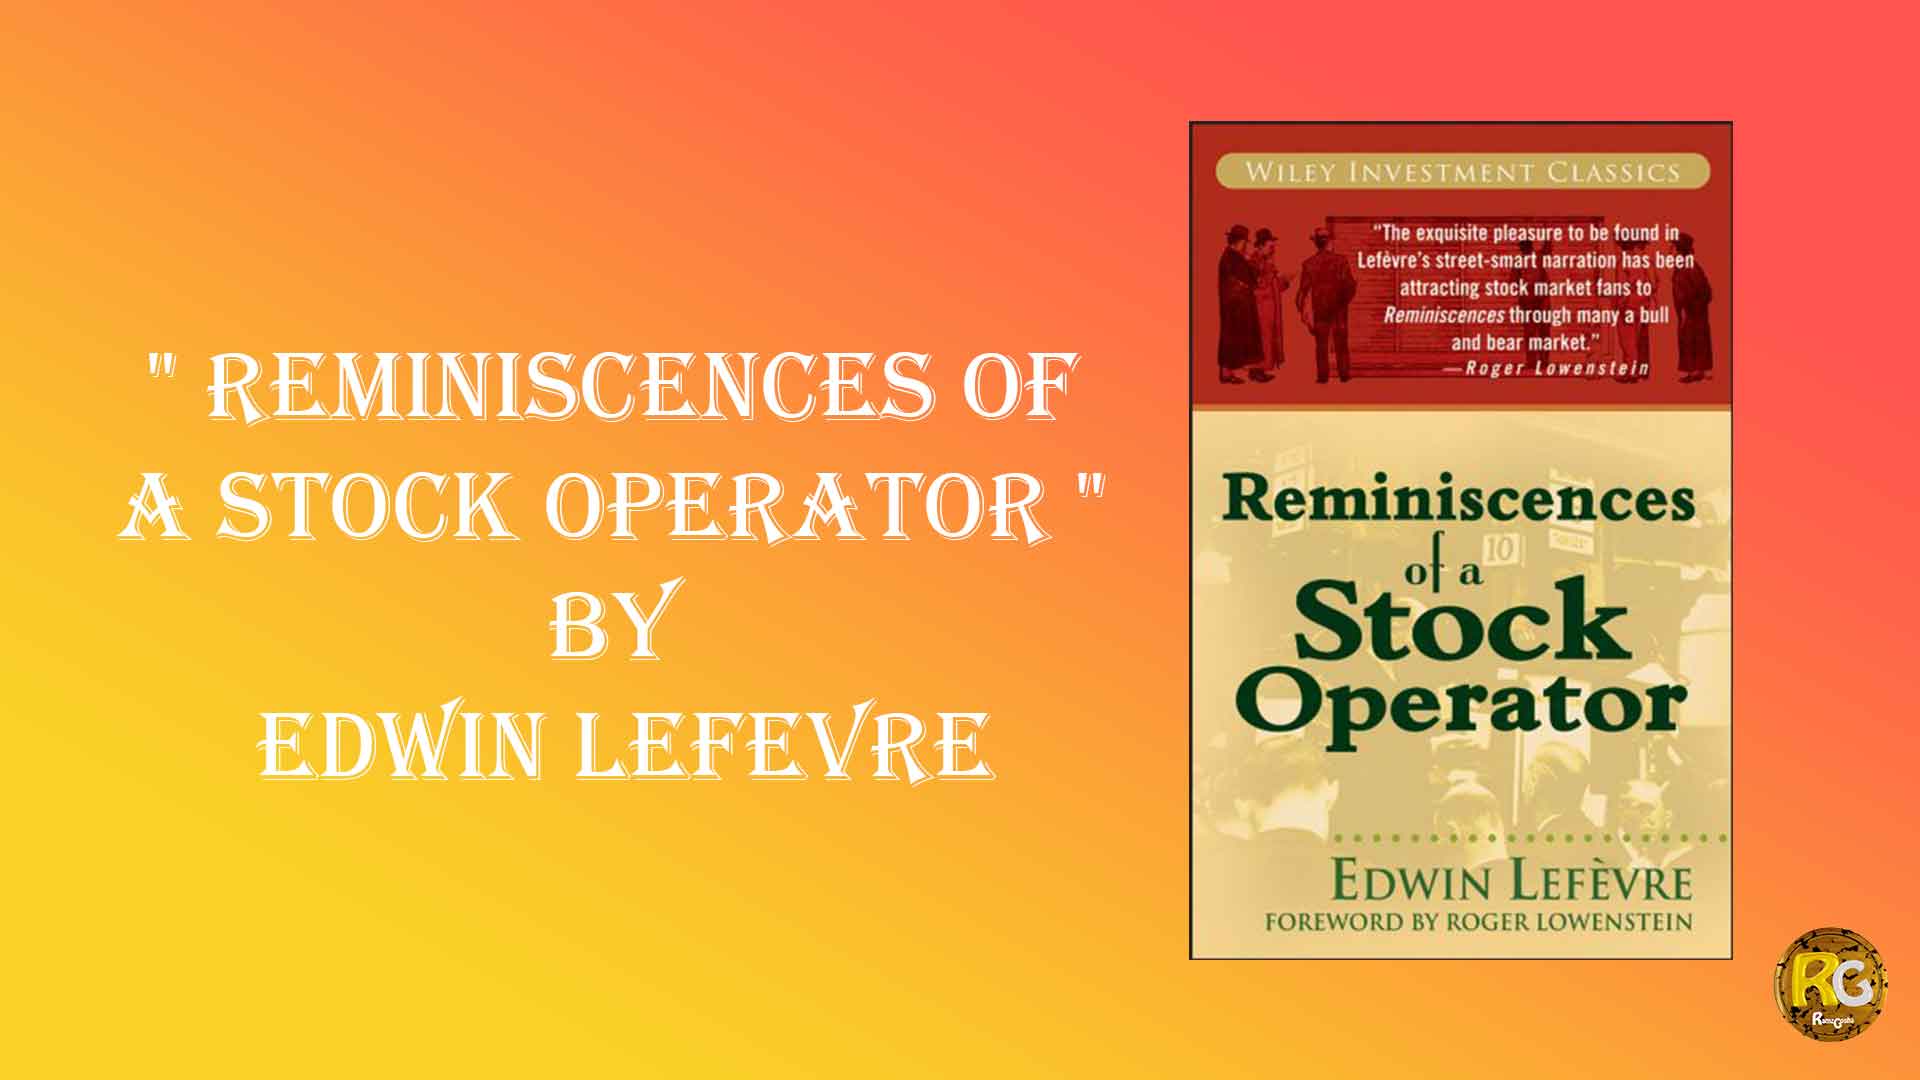 " Reminiscences of a Stock Operator " by edwin lefevre